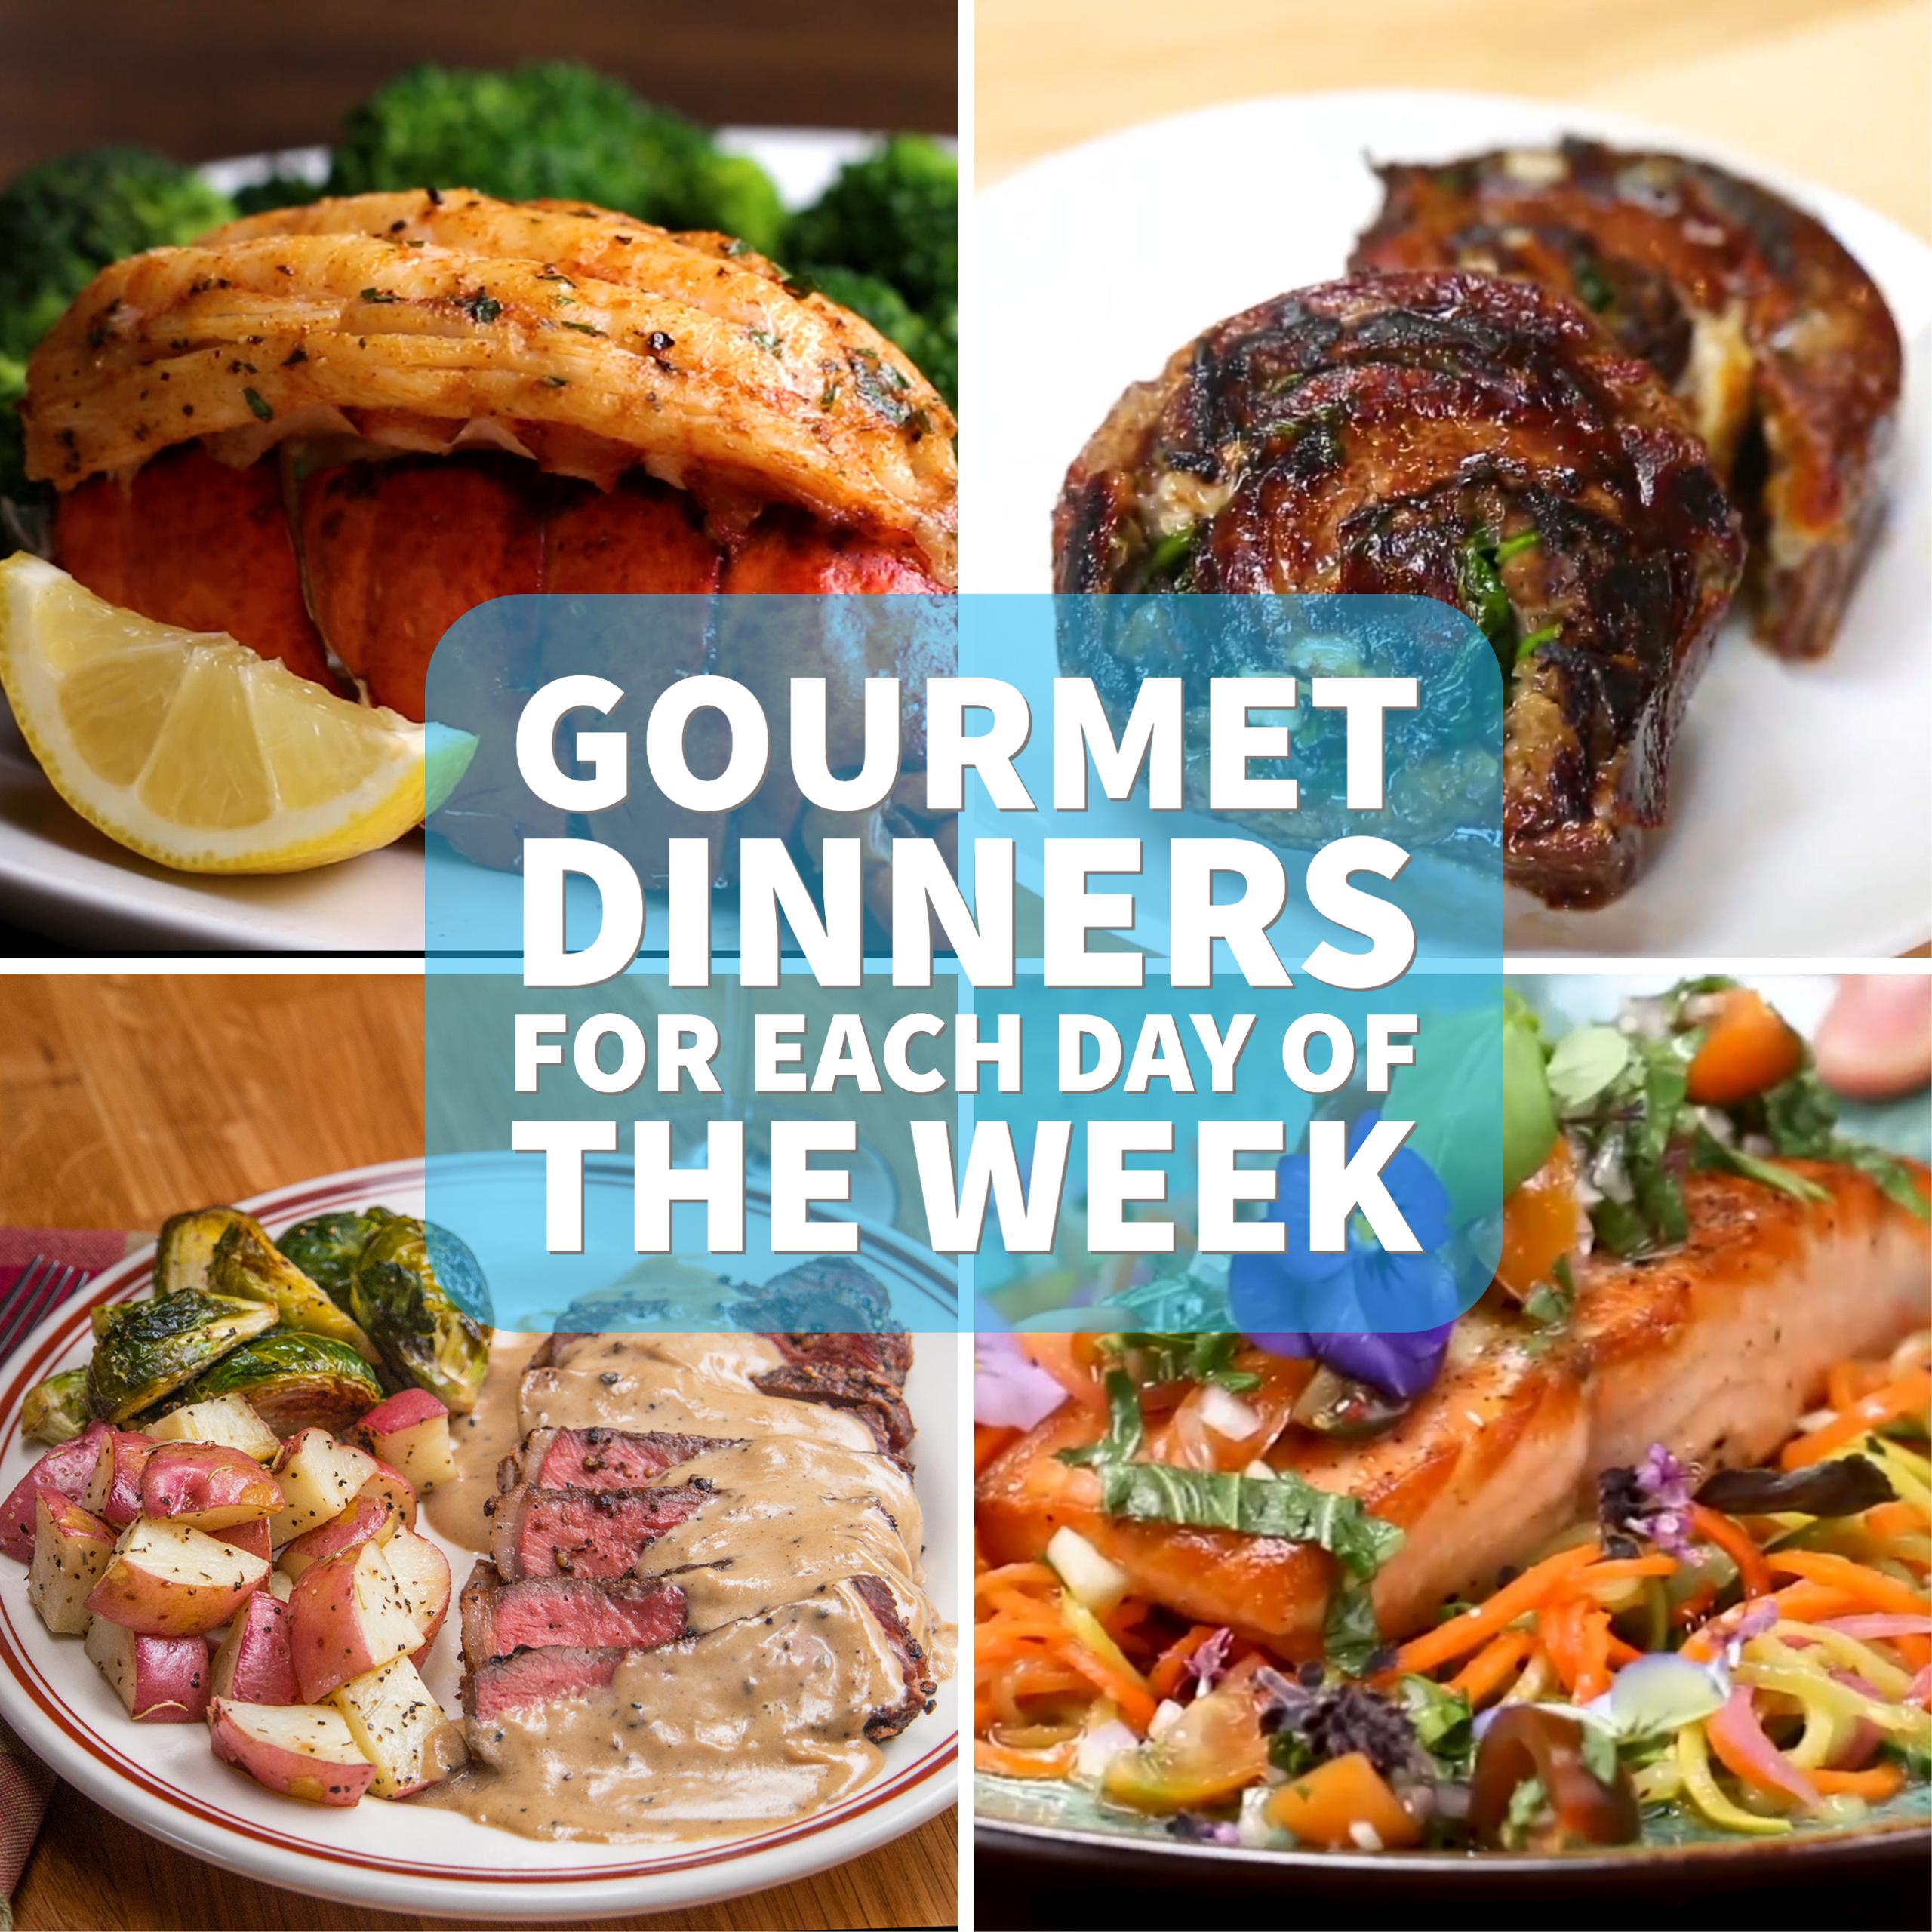 Gourmet Dinners For Each Day Of The Week | Recipes